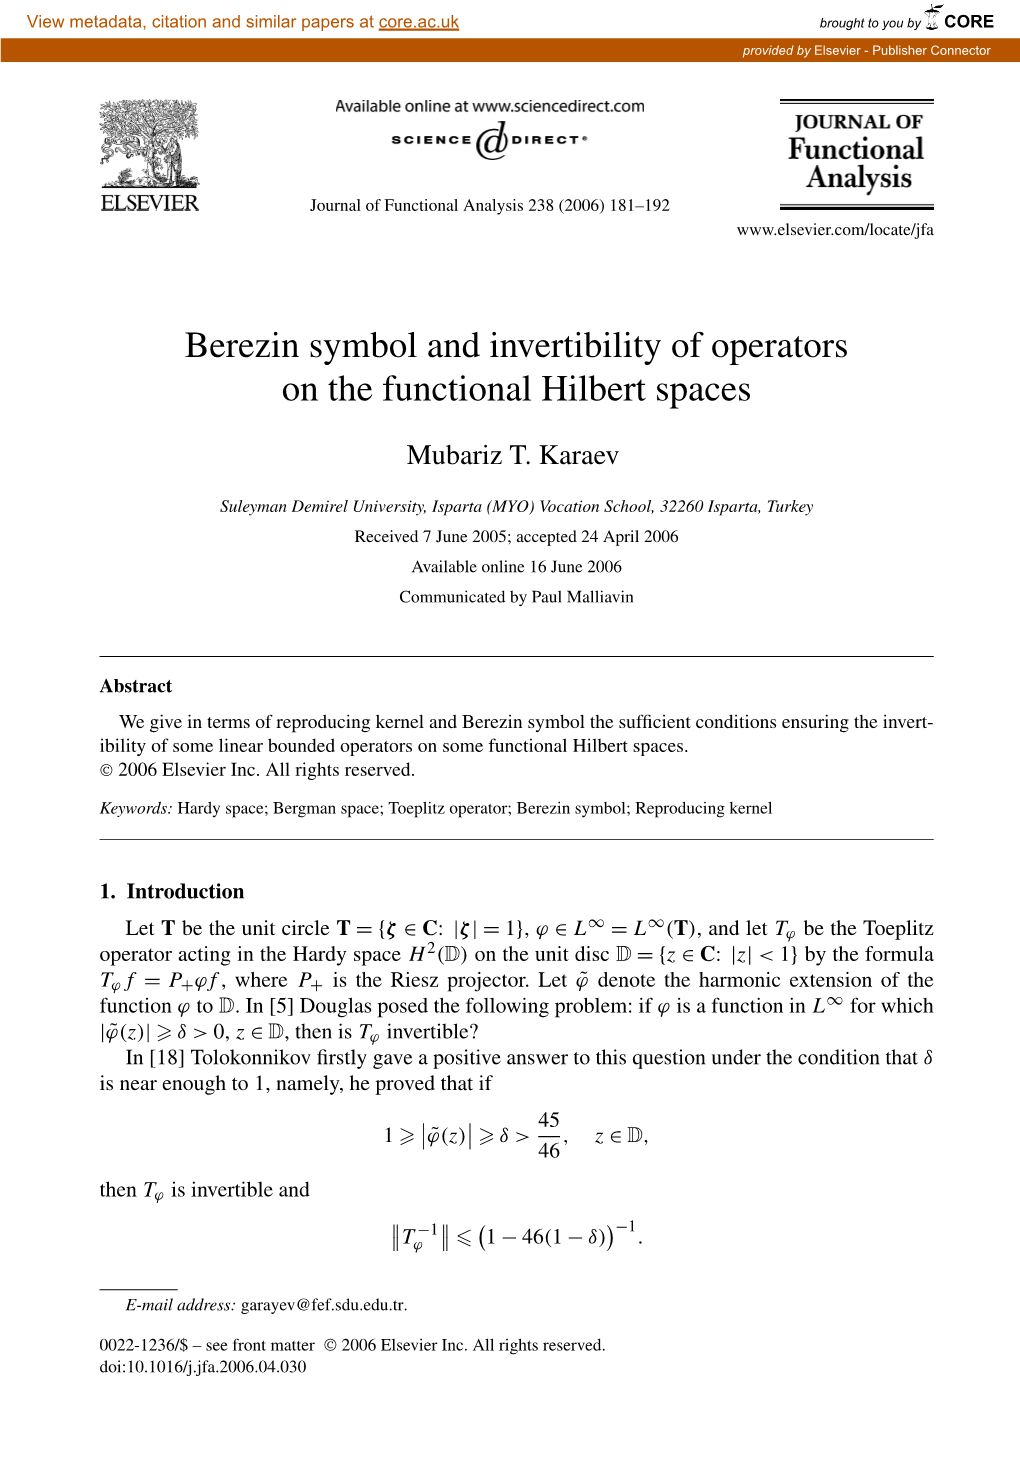 Berezin Symbol and Invertibility of Operators on the Functional Hilbert Spaces